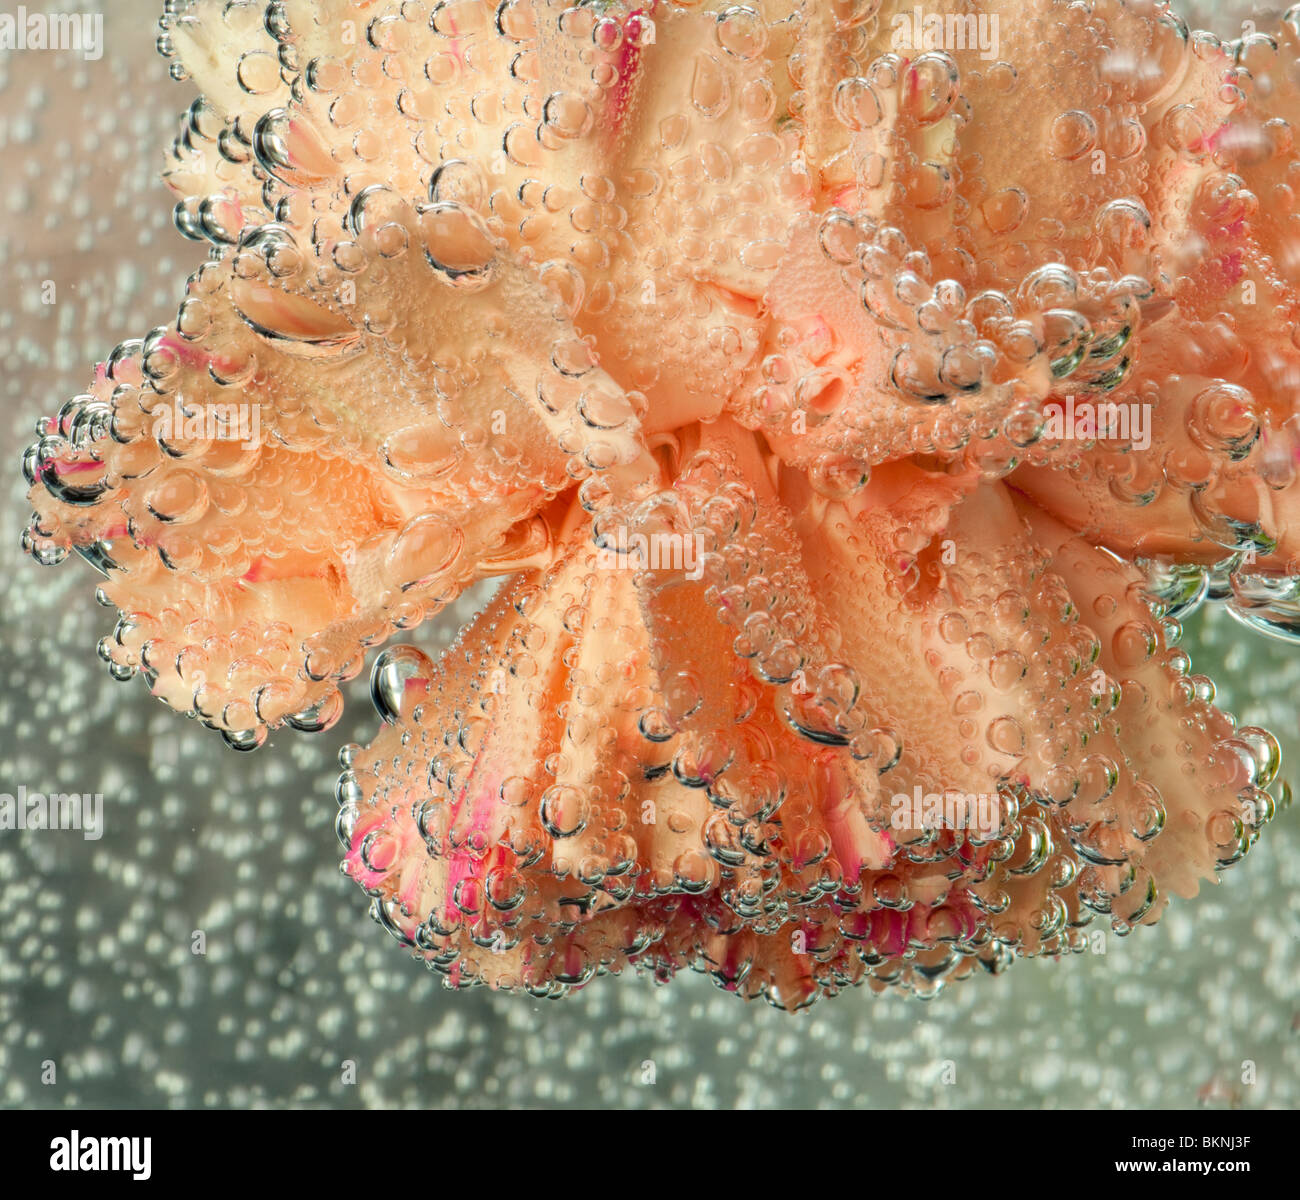 A Carnation underwater trapping air bubbles Stock Photo